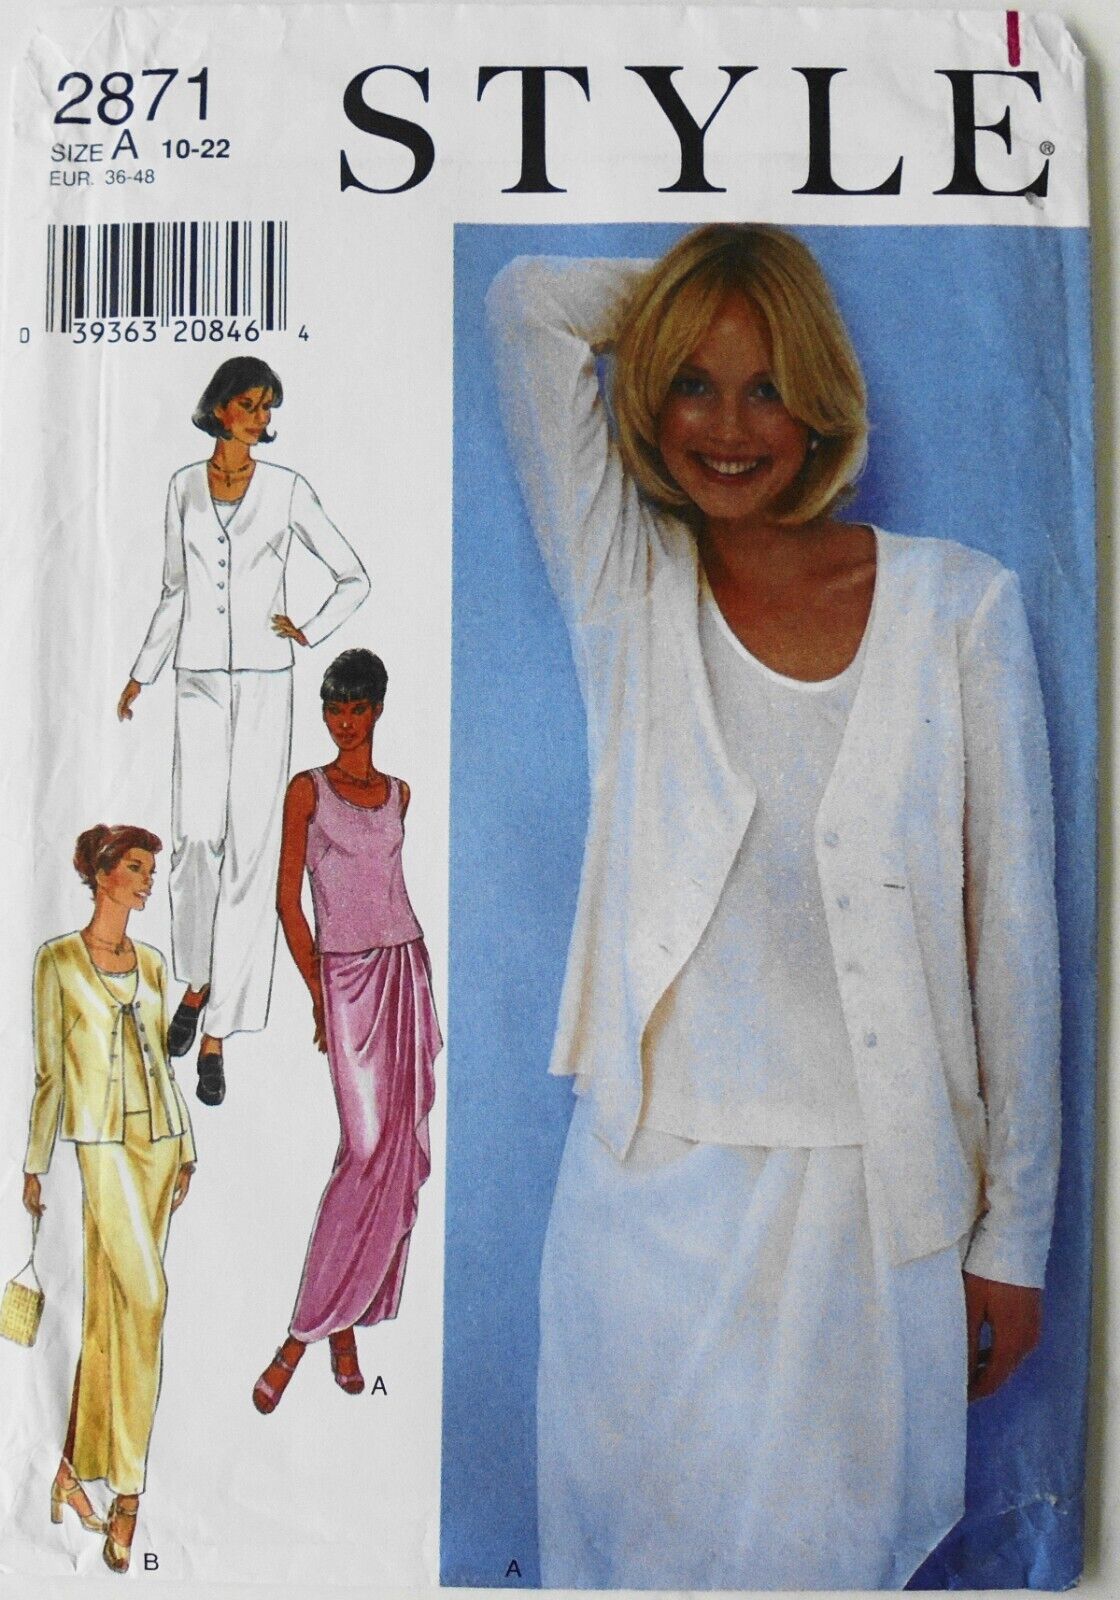 Style 2871 Misses Top Jacket Pants Skirt Sewing Pattern 10-22